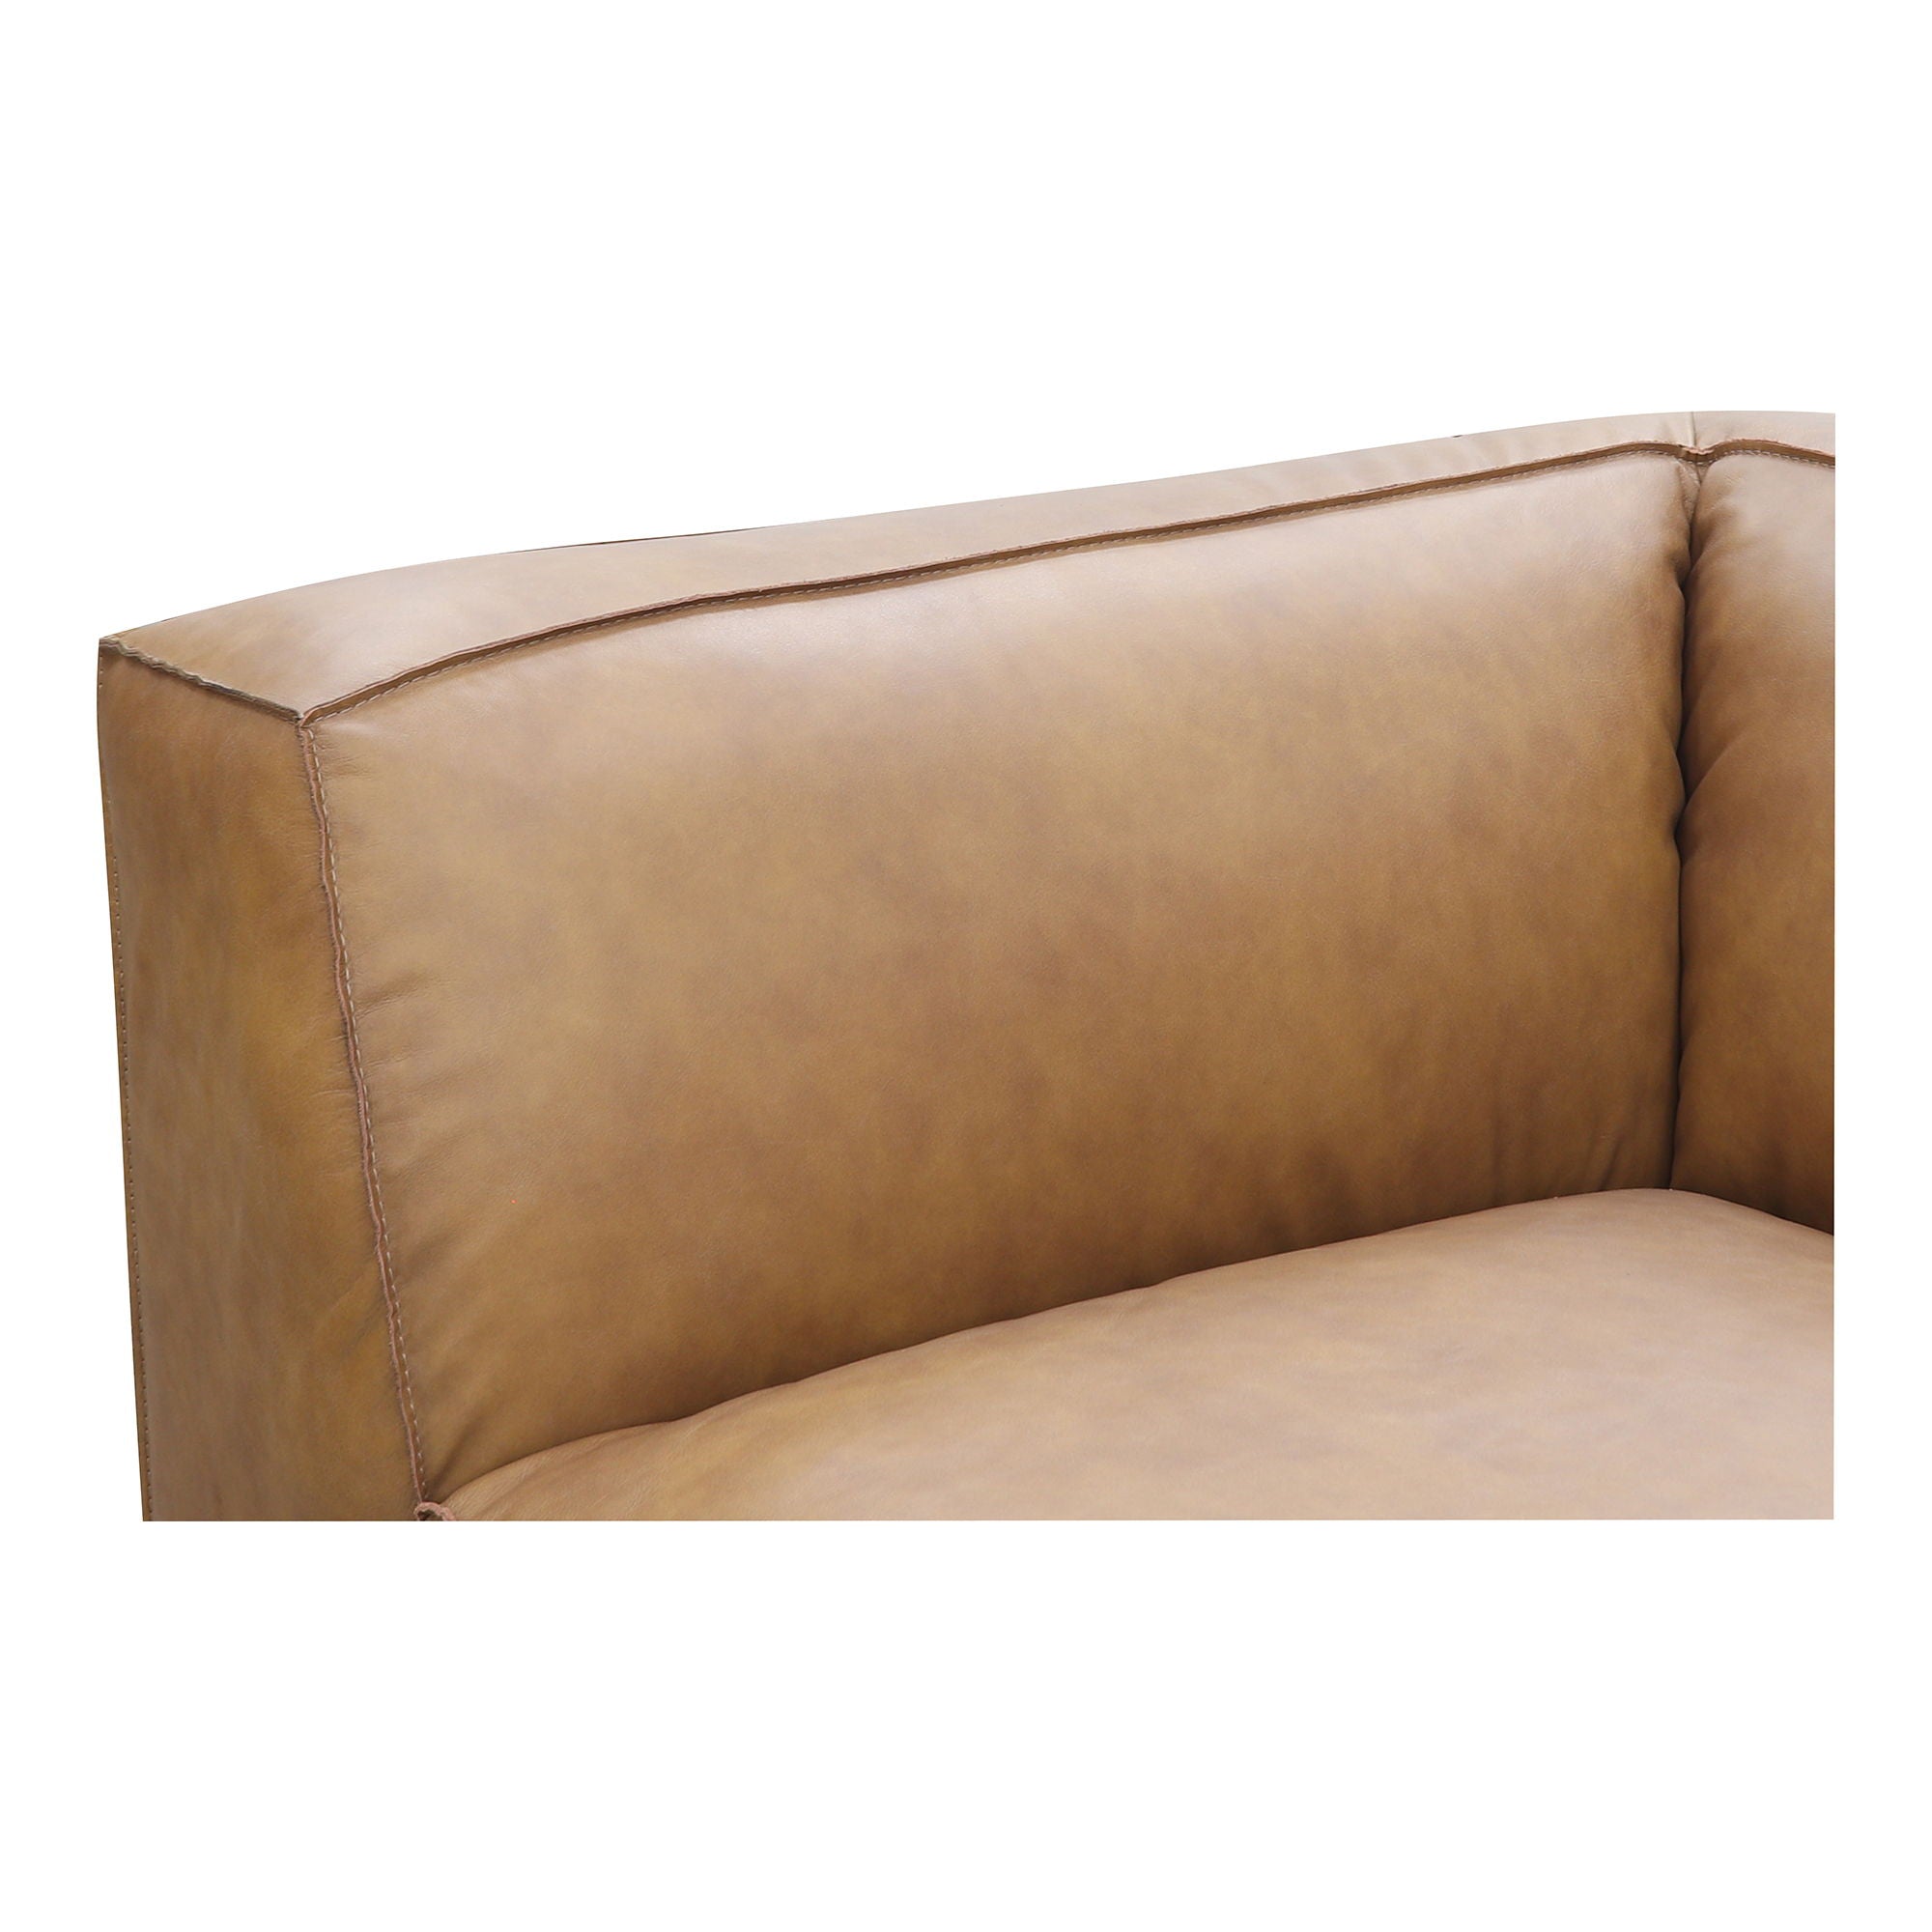 Form - Classic L Modular Sectional - Light Brown - Sonoran Leather